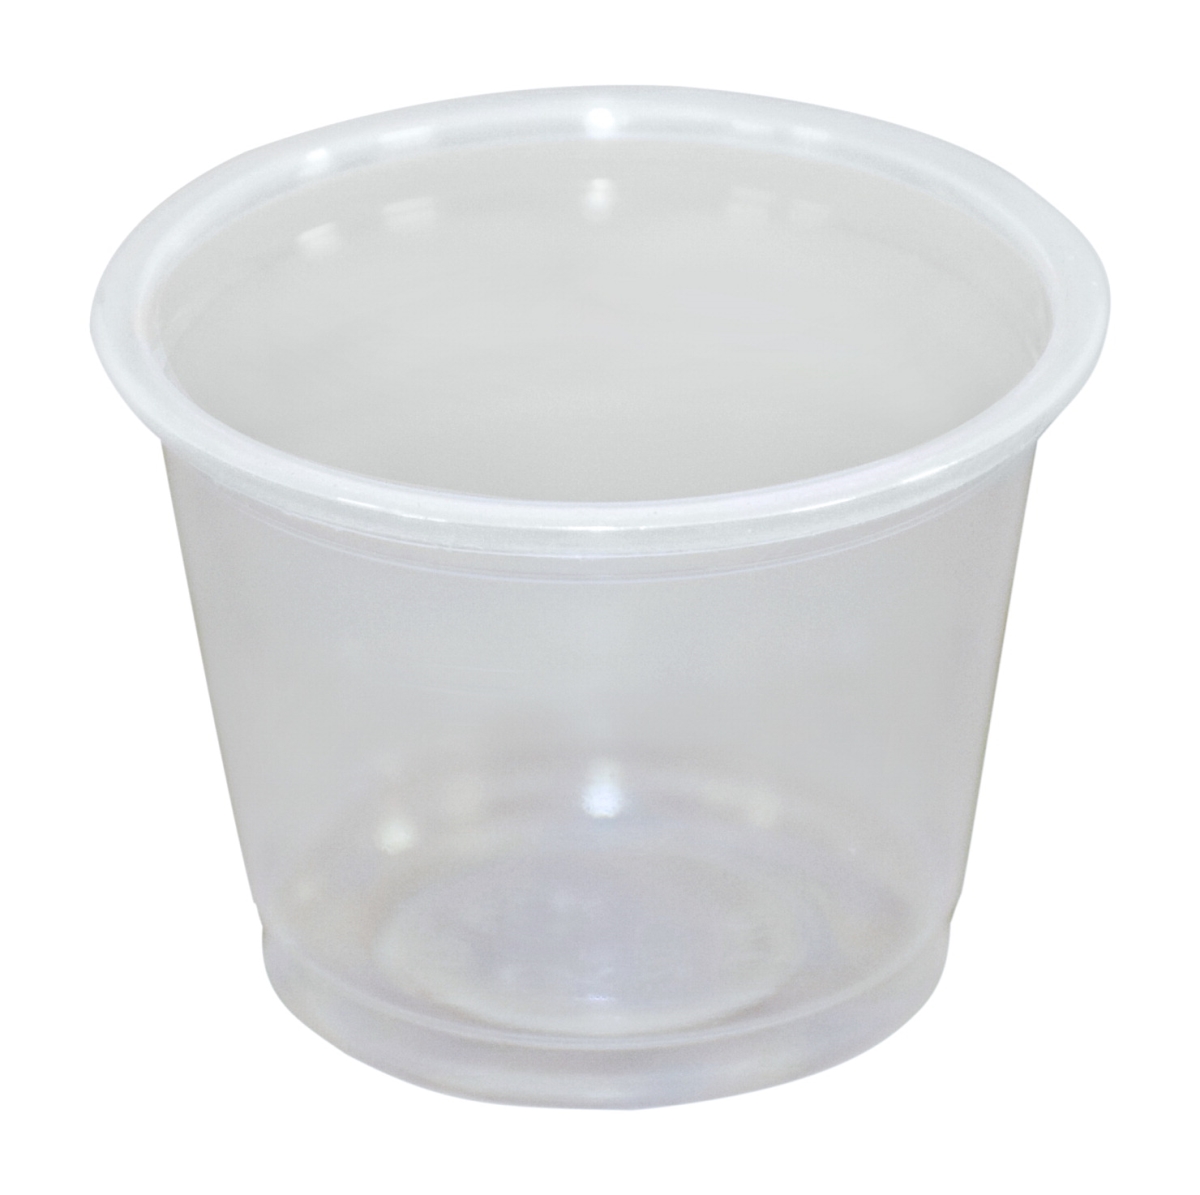 Picture of CrystalWare 2003387 1 oz Portion Cups, Clear - Pack of 2500